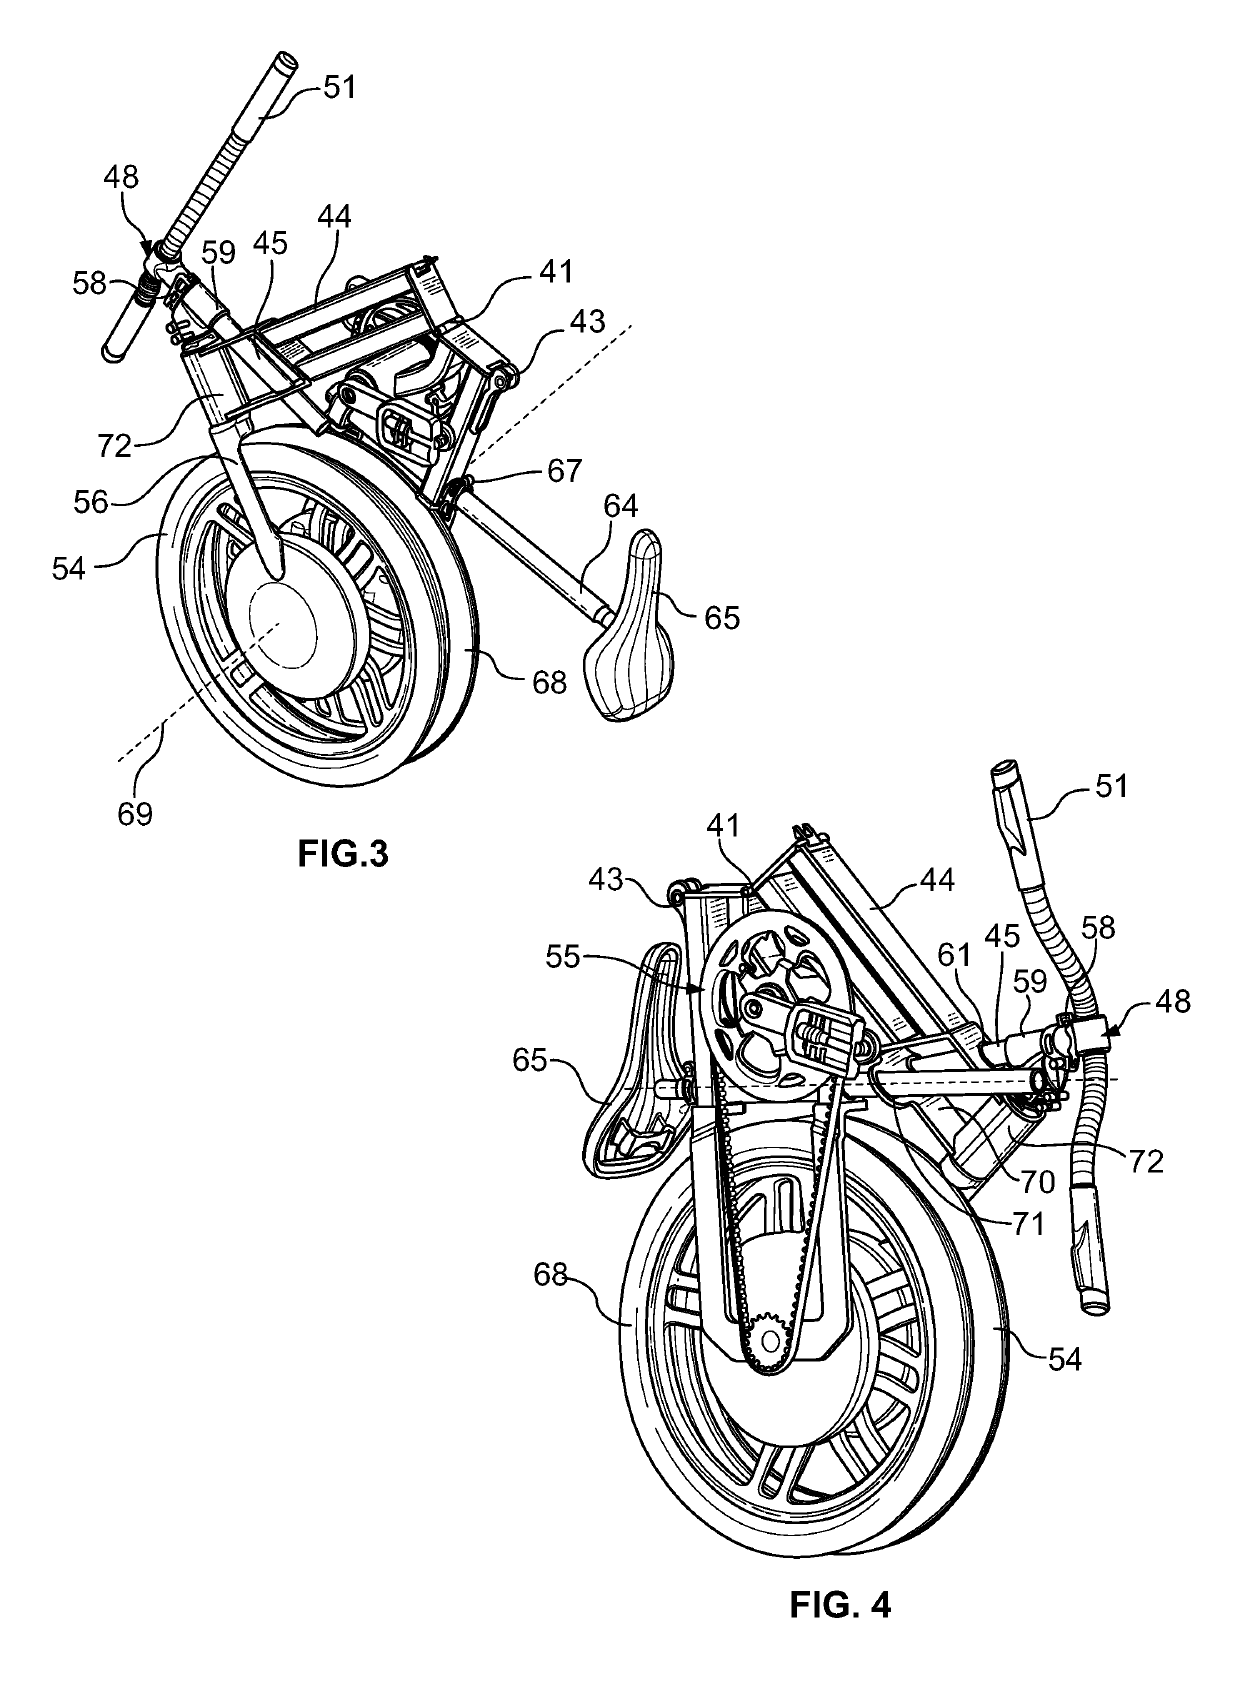 Foldable cycle assembly